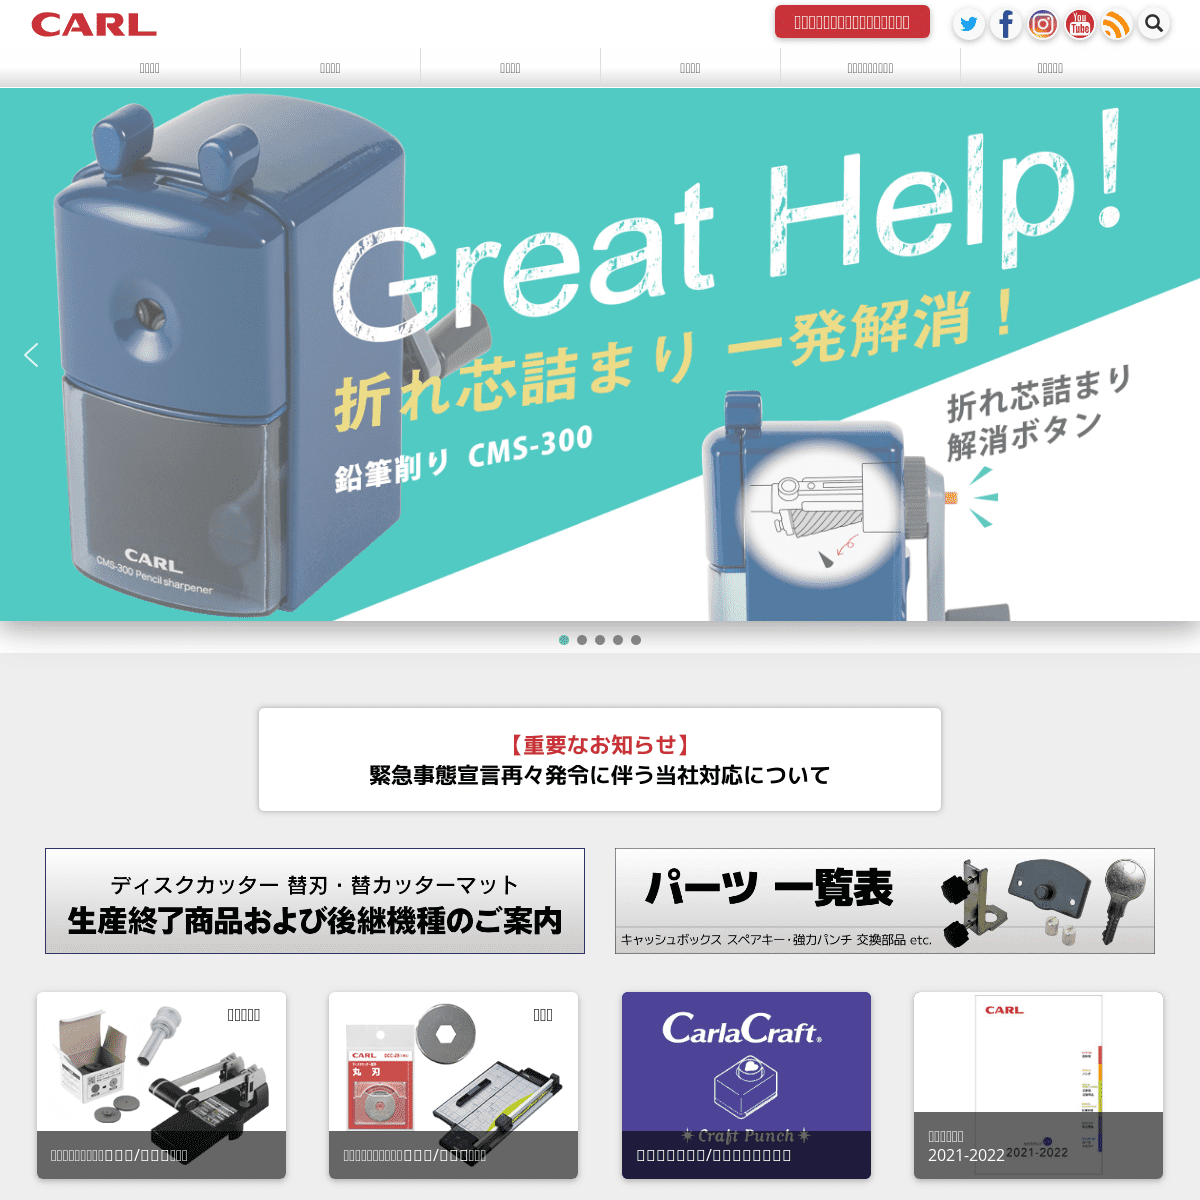 A complete backup of https://carl.co.jp